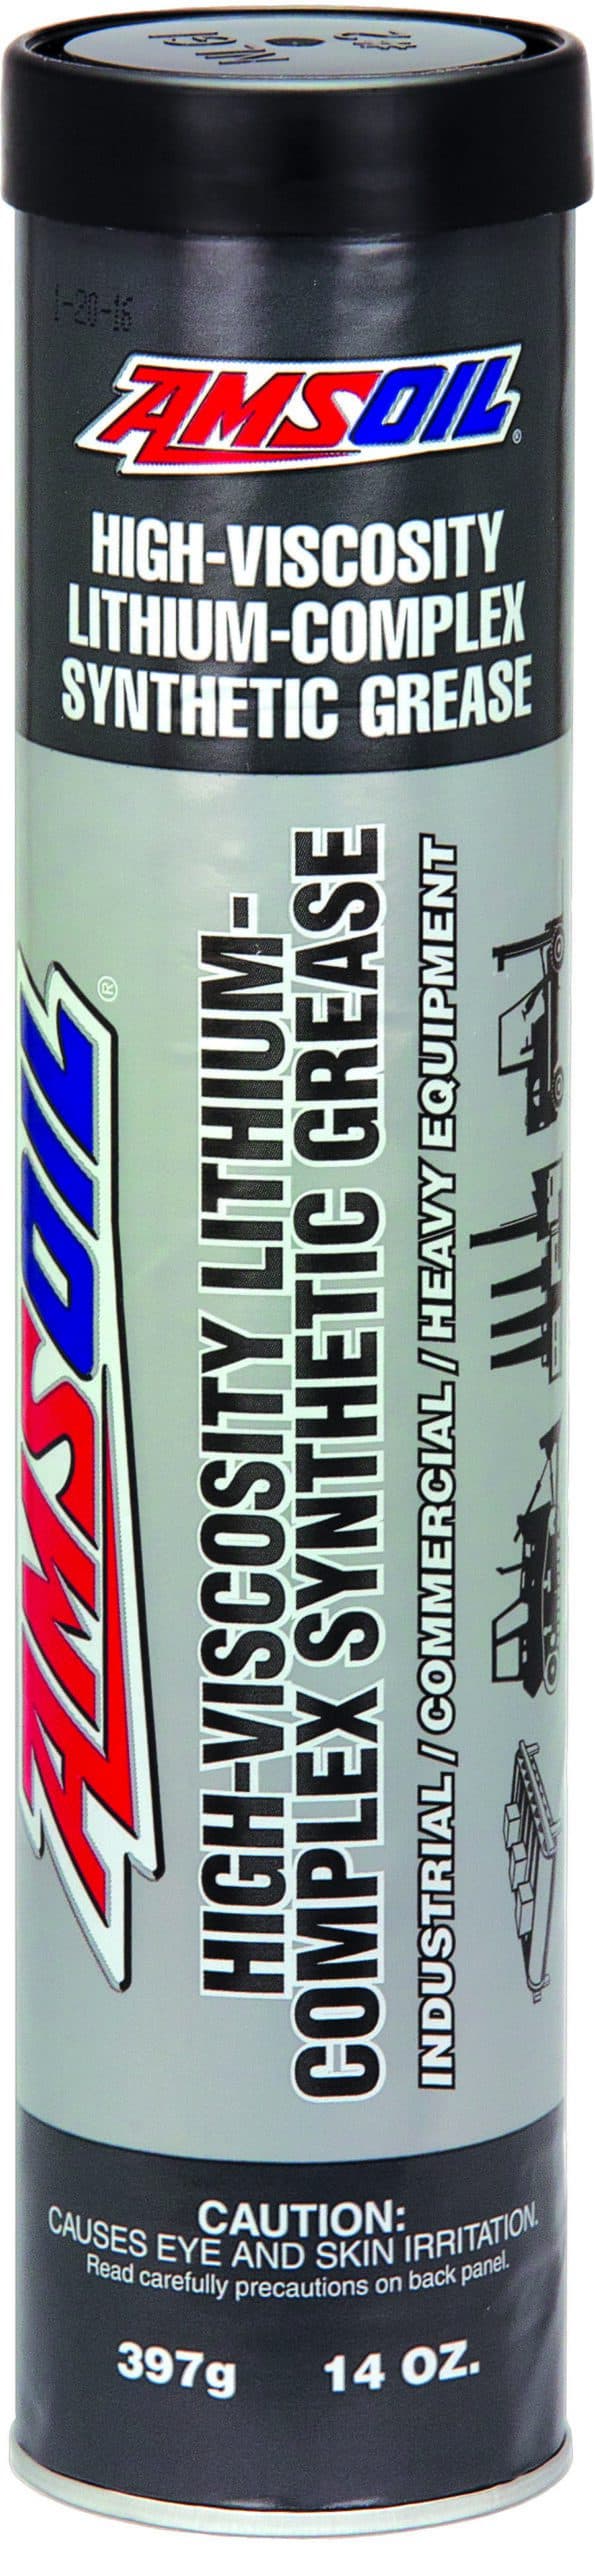 A cartridge of AMSOIL High-Viscosity Lithium-Complex Synthetic Grease, comprising of additives, providing superior extreme-pressure and corrosion protection.